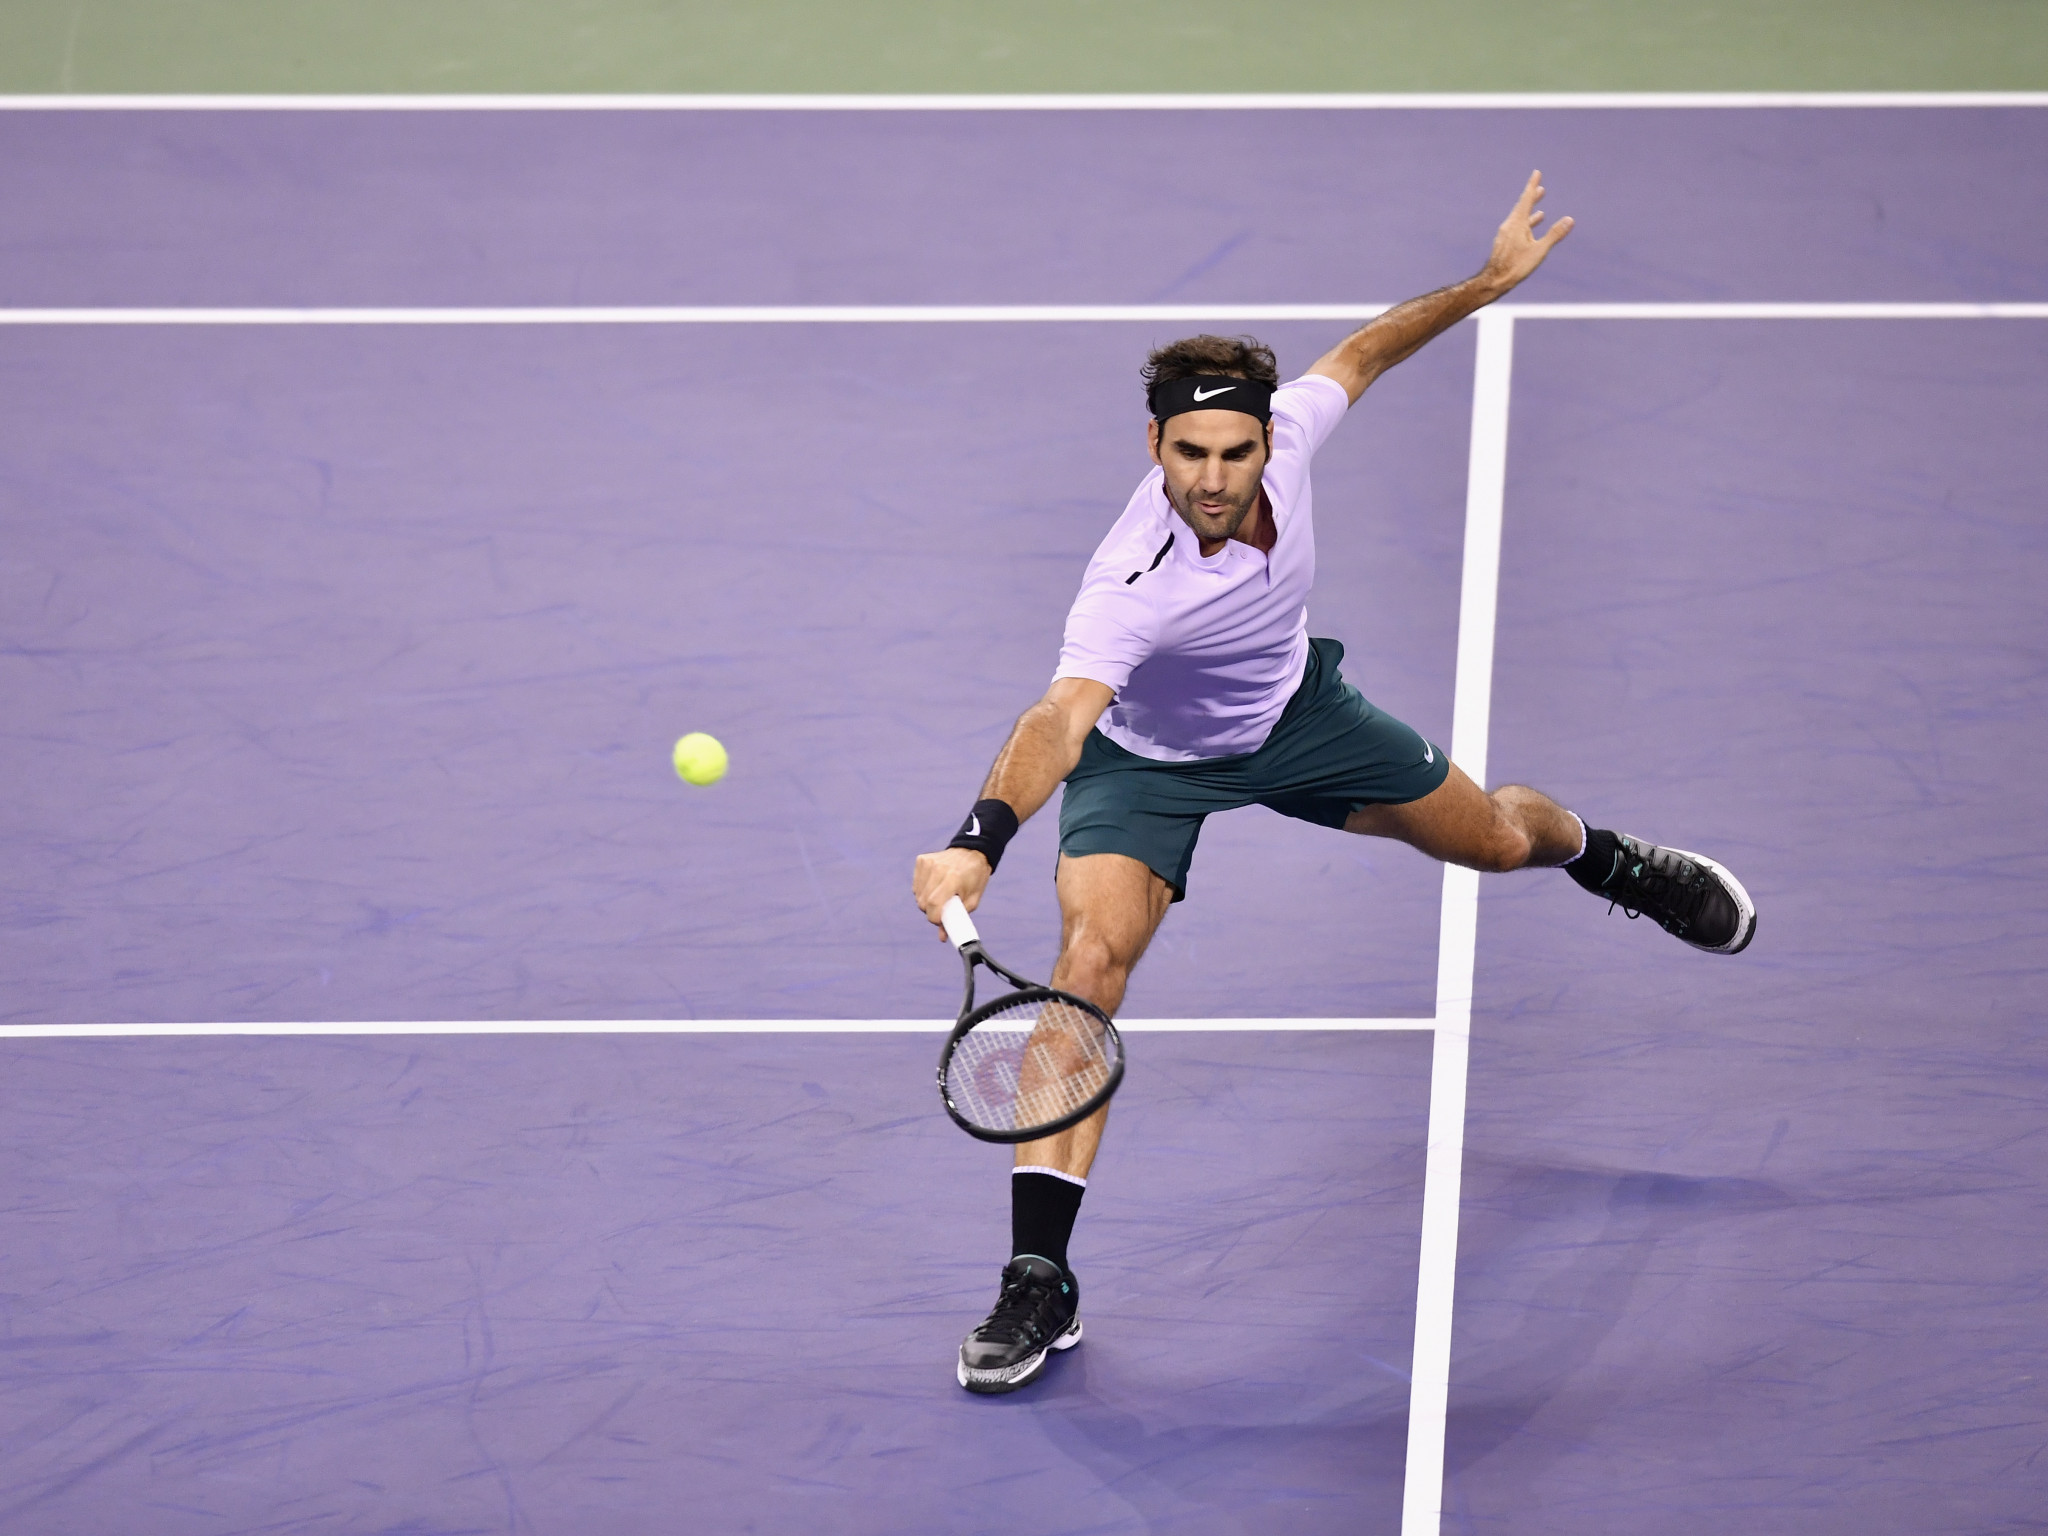 Roger Federer produced a superb display to beat Rafael Nadal and win the Shanghai Masters ©Getty Images